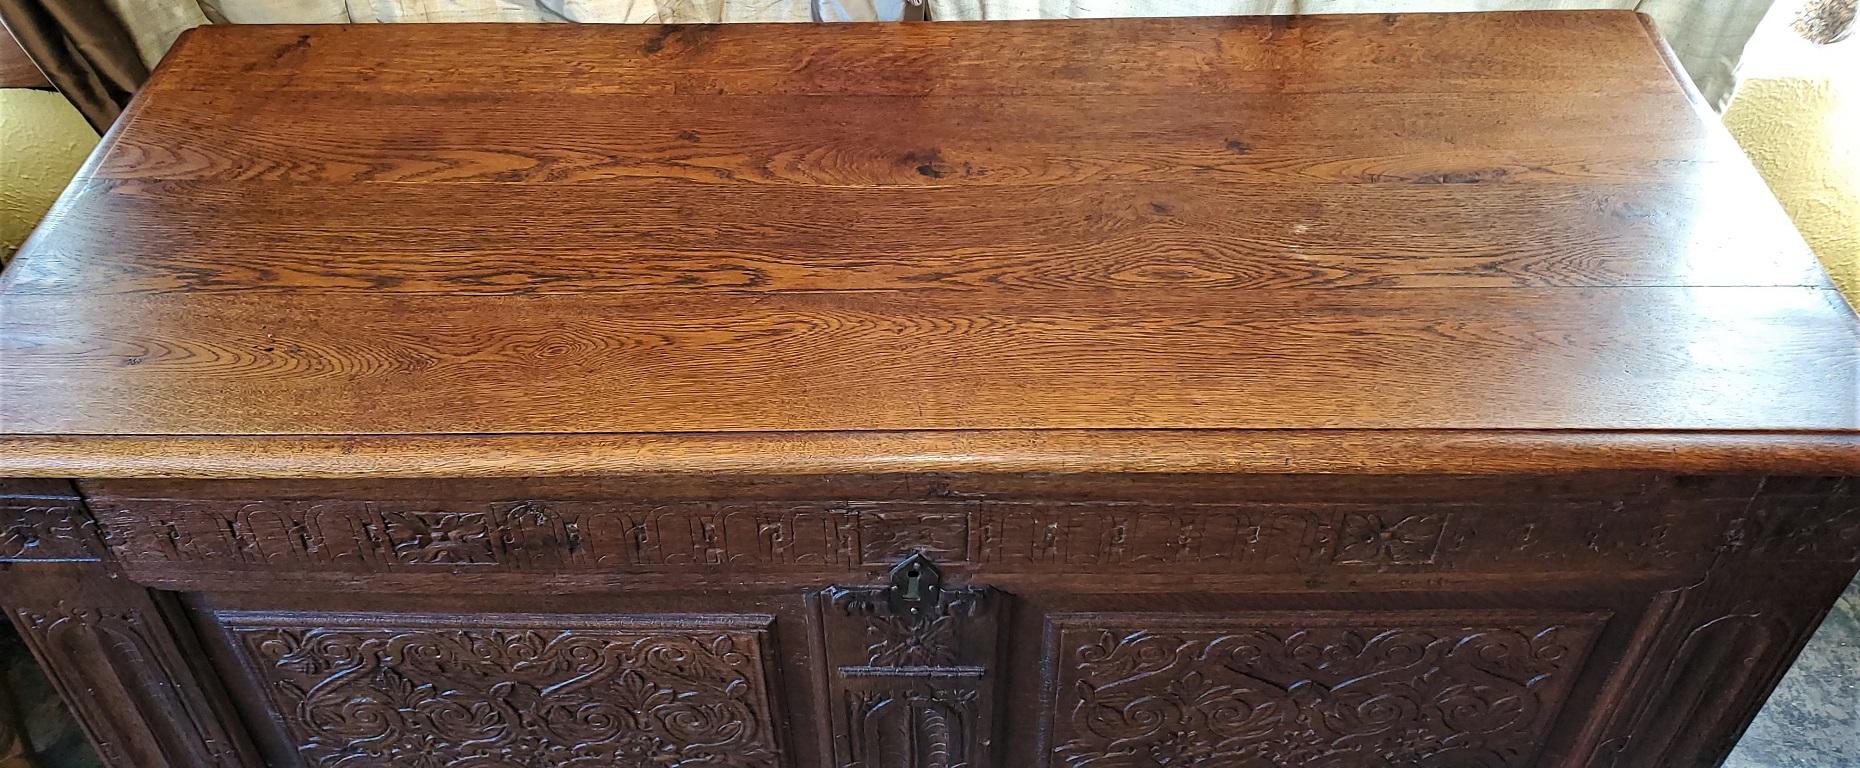 Hand-Carved 17th Century English Carved Oak Dowry Chest For Sale